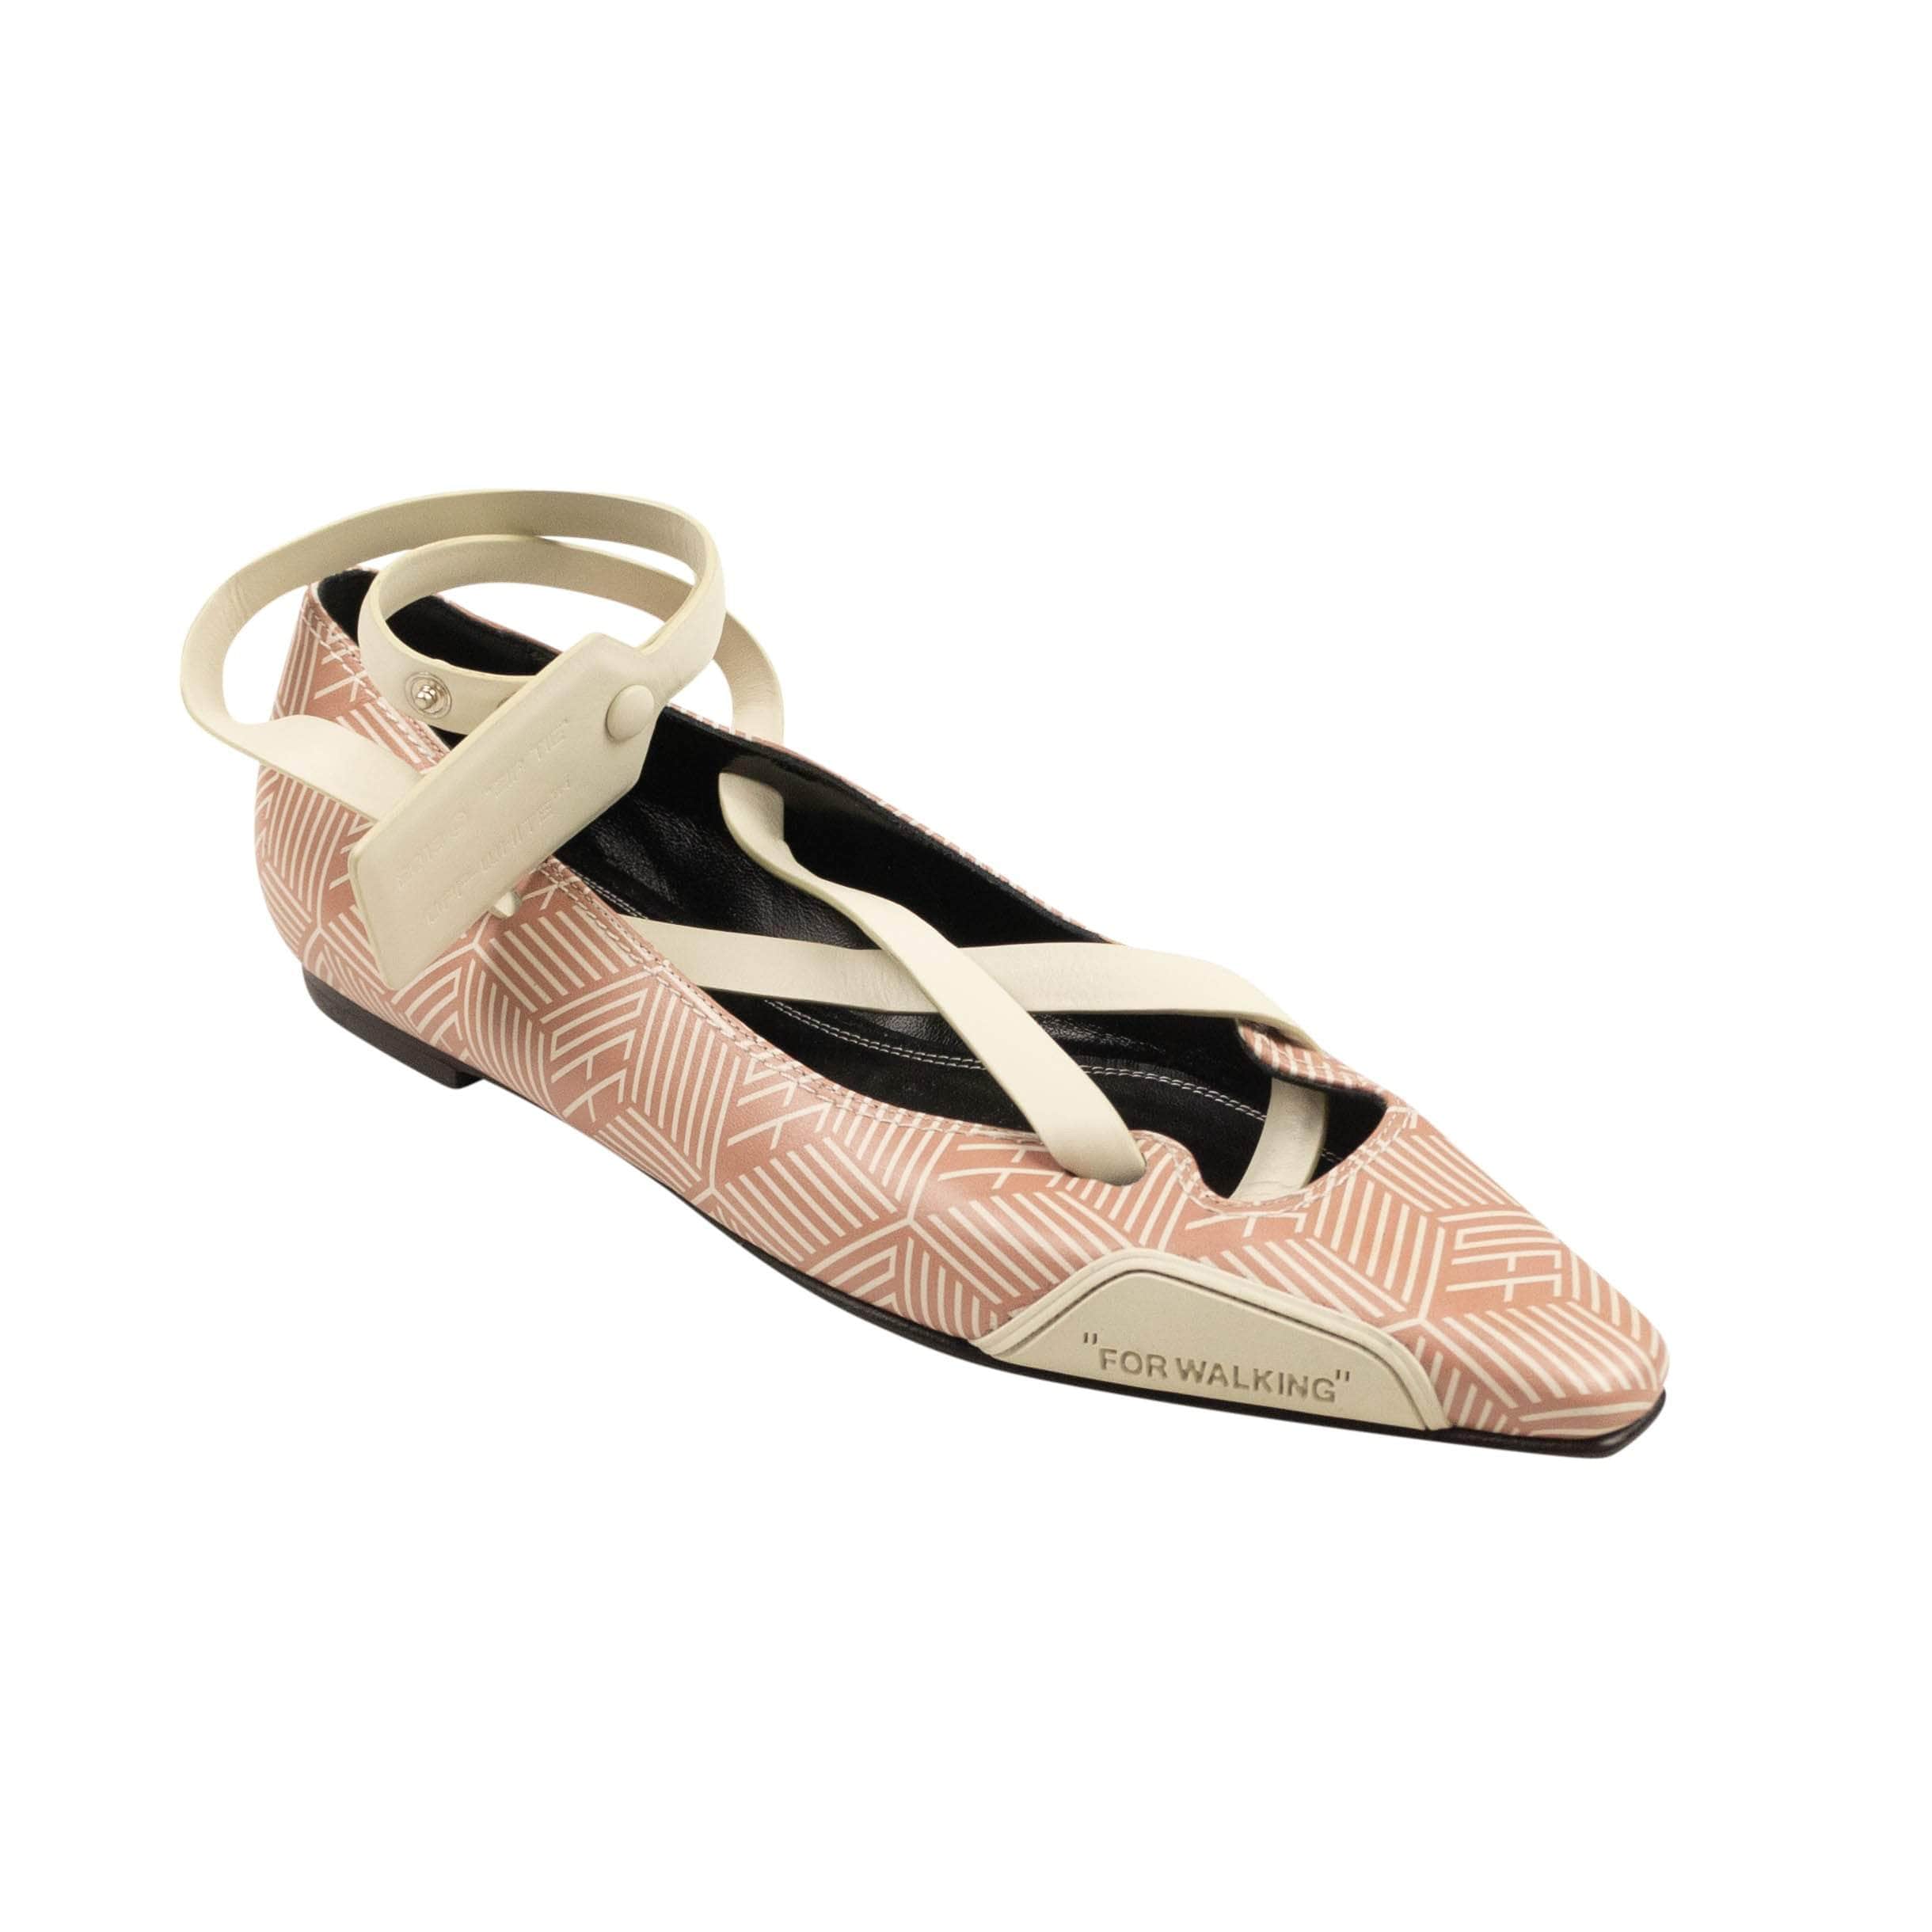 OFF-WHITE c/o VIRGIL ABLOH 1000-2000, channelenable-all, chicmi, couponcollection, gender-womens, main-shoes, off-white-c-o-virgil-abloh, size-39 39 Pink Monogram Logo Wrapped Flats 82NGG-OW-2167/39 82NGG-OW-2167/39